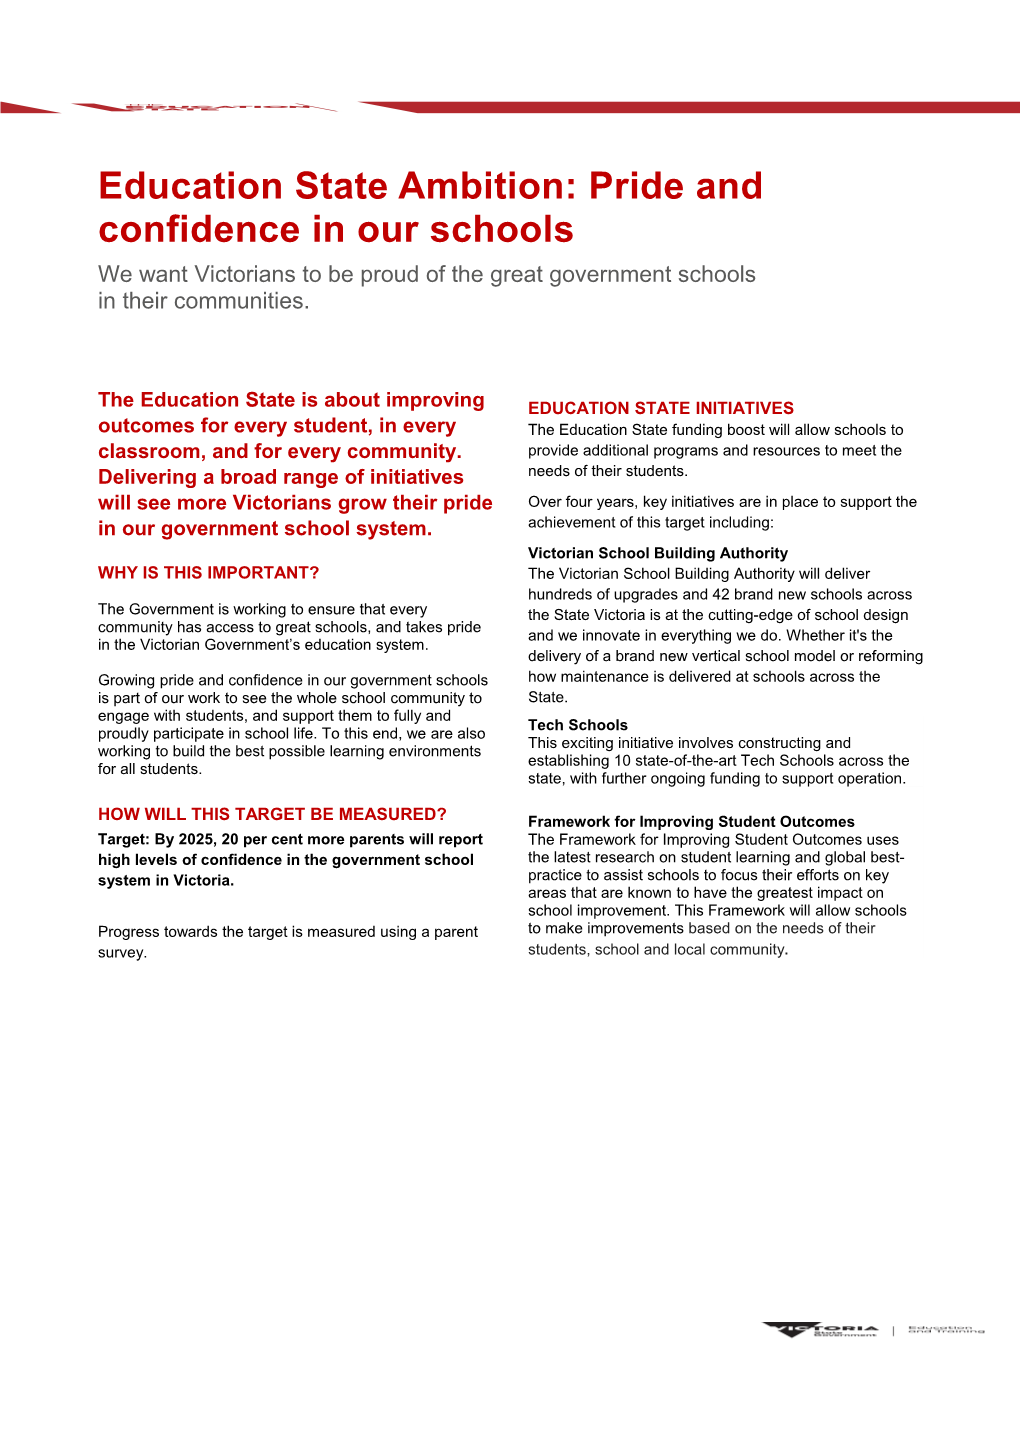 Education State Ambition: Pride and Confidence in Our Schools